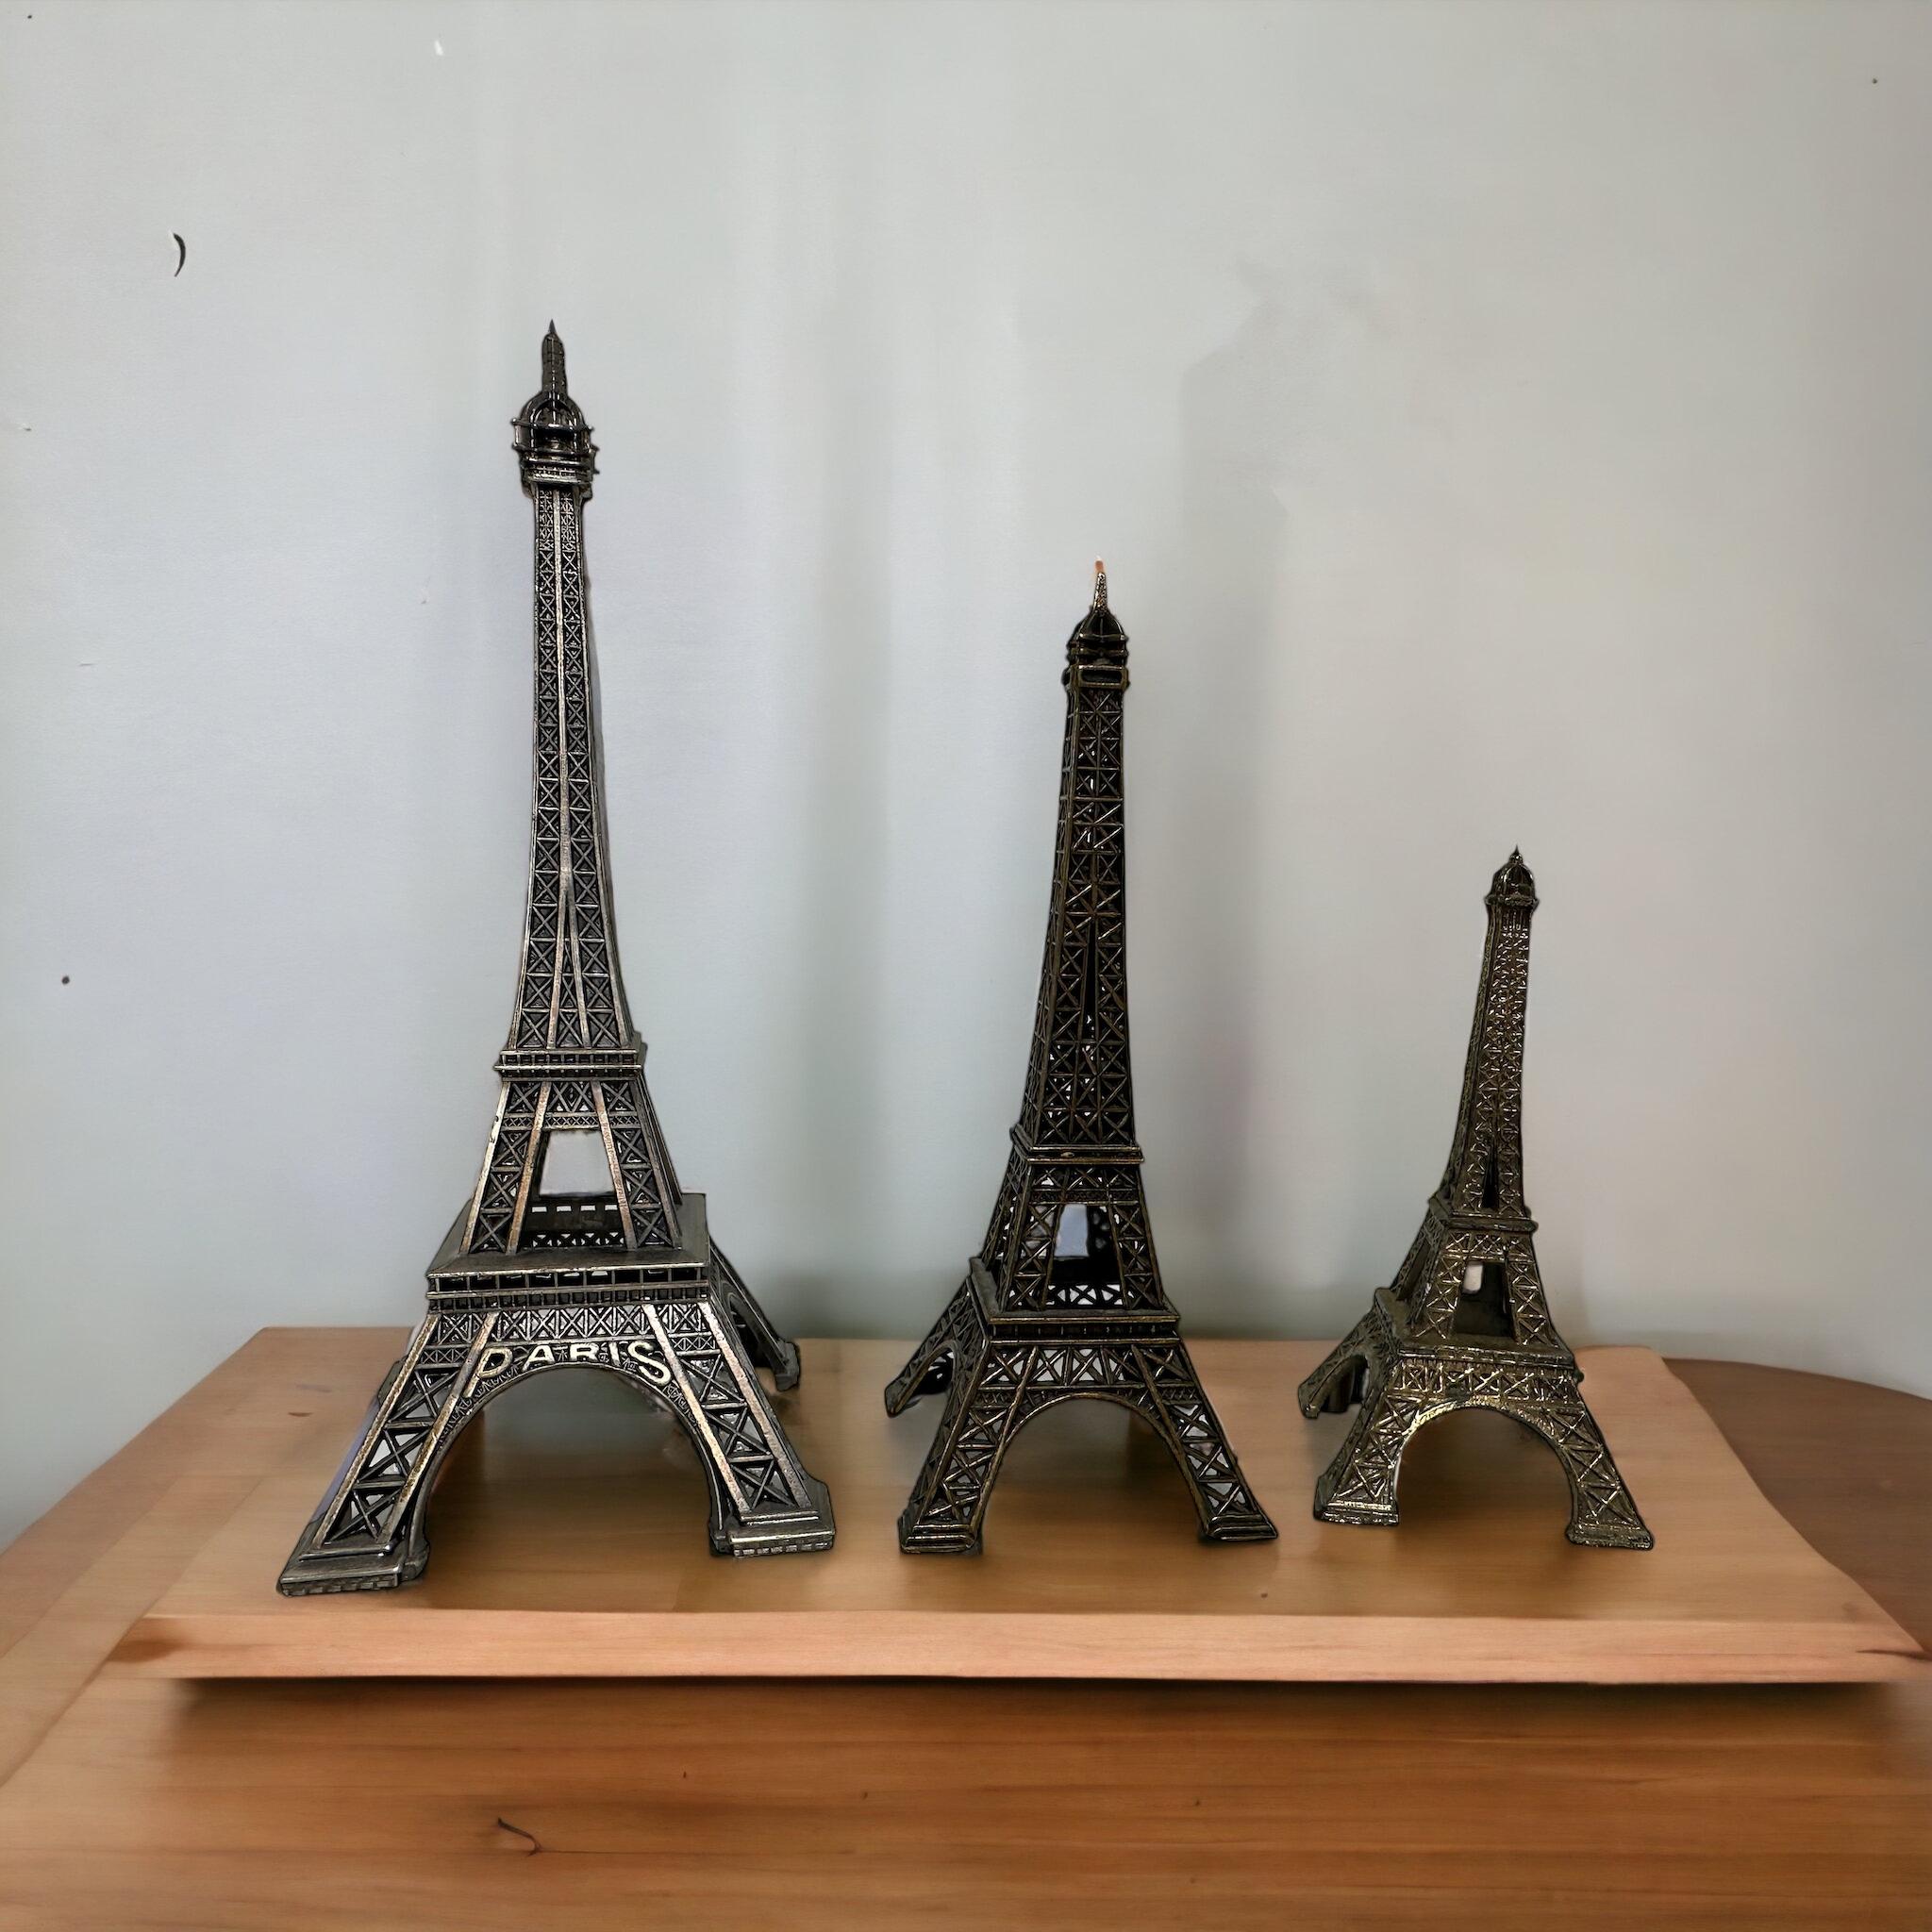 A 1960s - 1970s set of three souvenir building architectural models. Some wear with a nice patina, but this is old-age. Made of metal. A beautiful nice desktop item or just a display item in your collections of Grand Tour souvenirs from around the